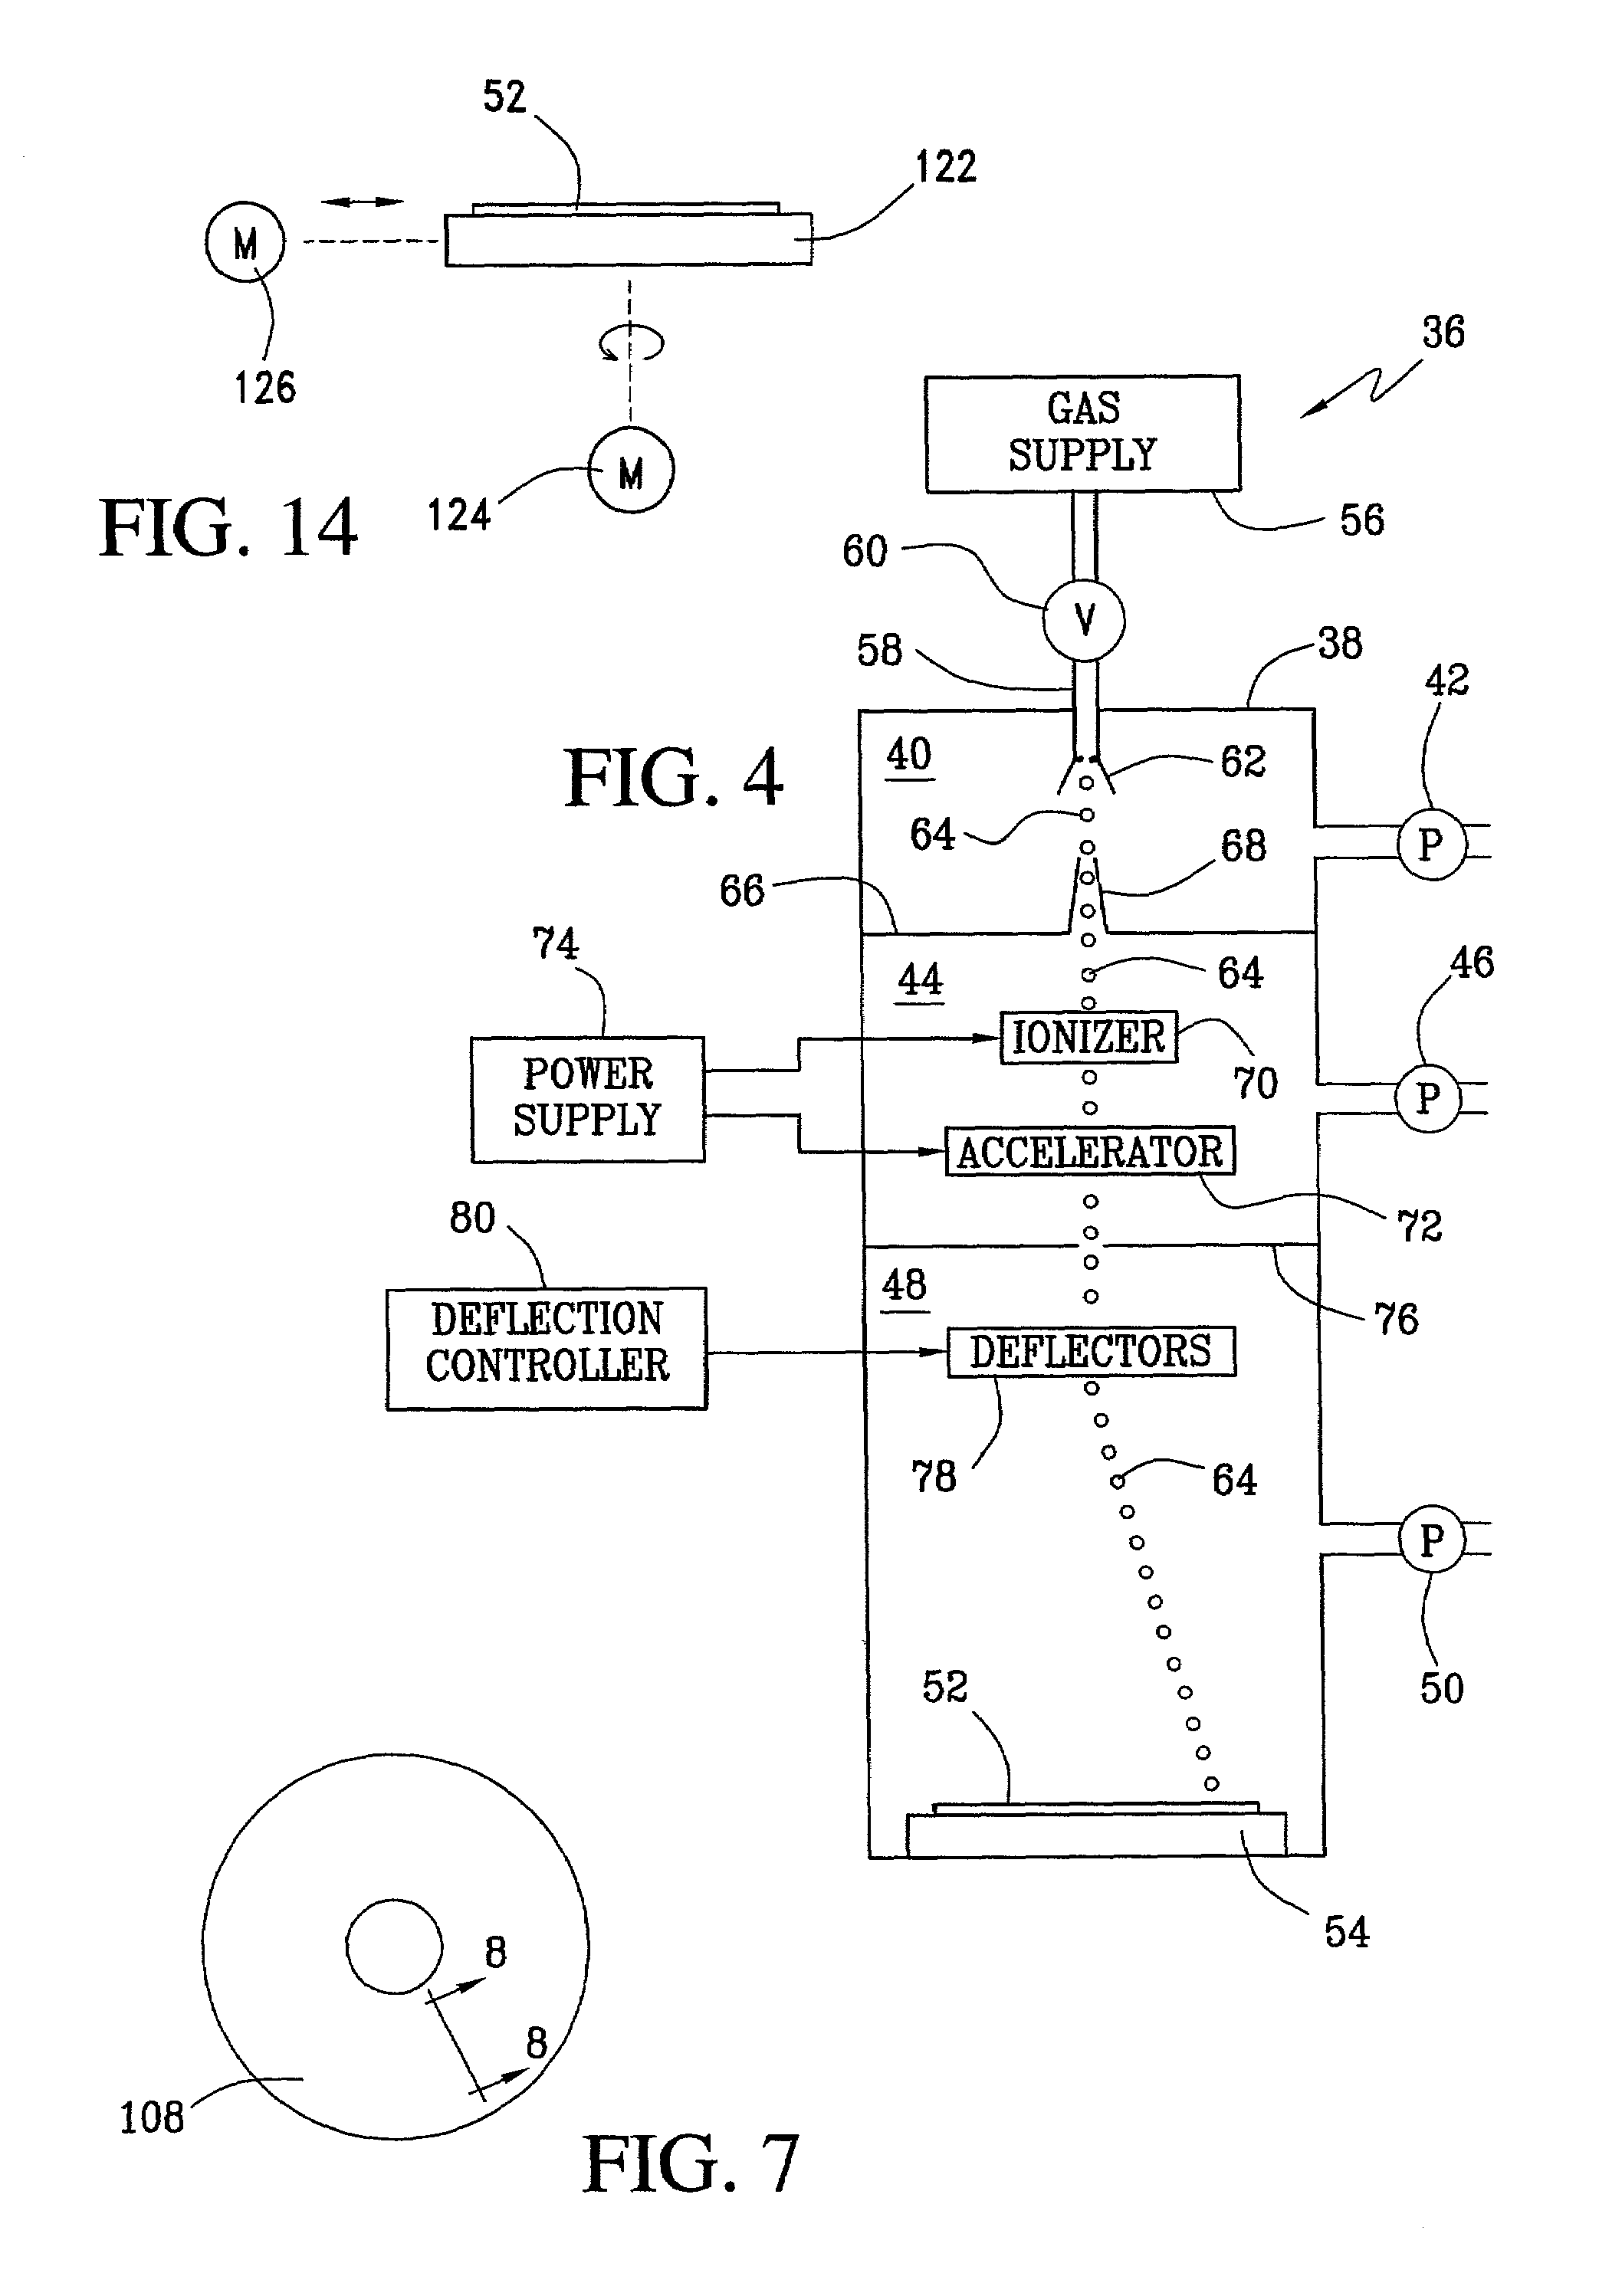 Disk, method for making it free of asperities utilizing a step of exposing a surface of the disk to a gas cluster ion beam and disk drive unit for using the disk